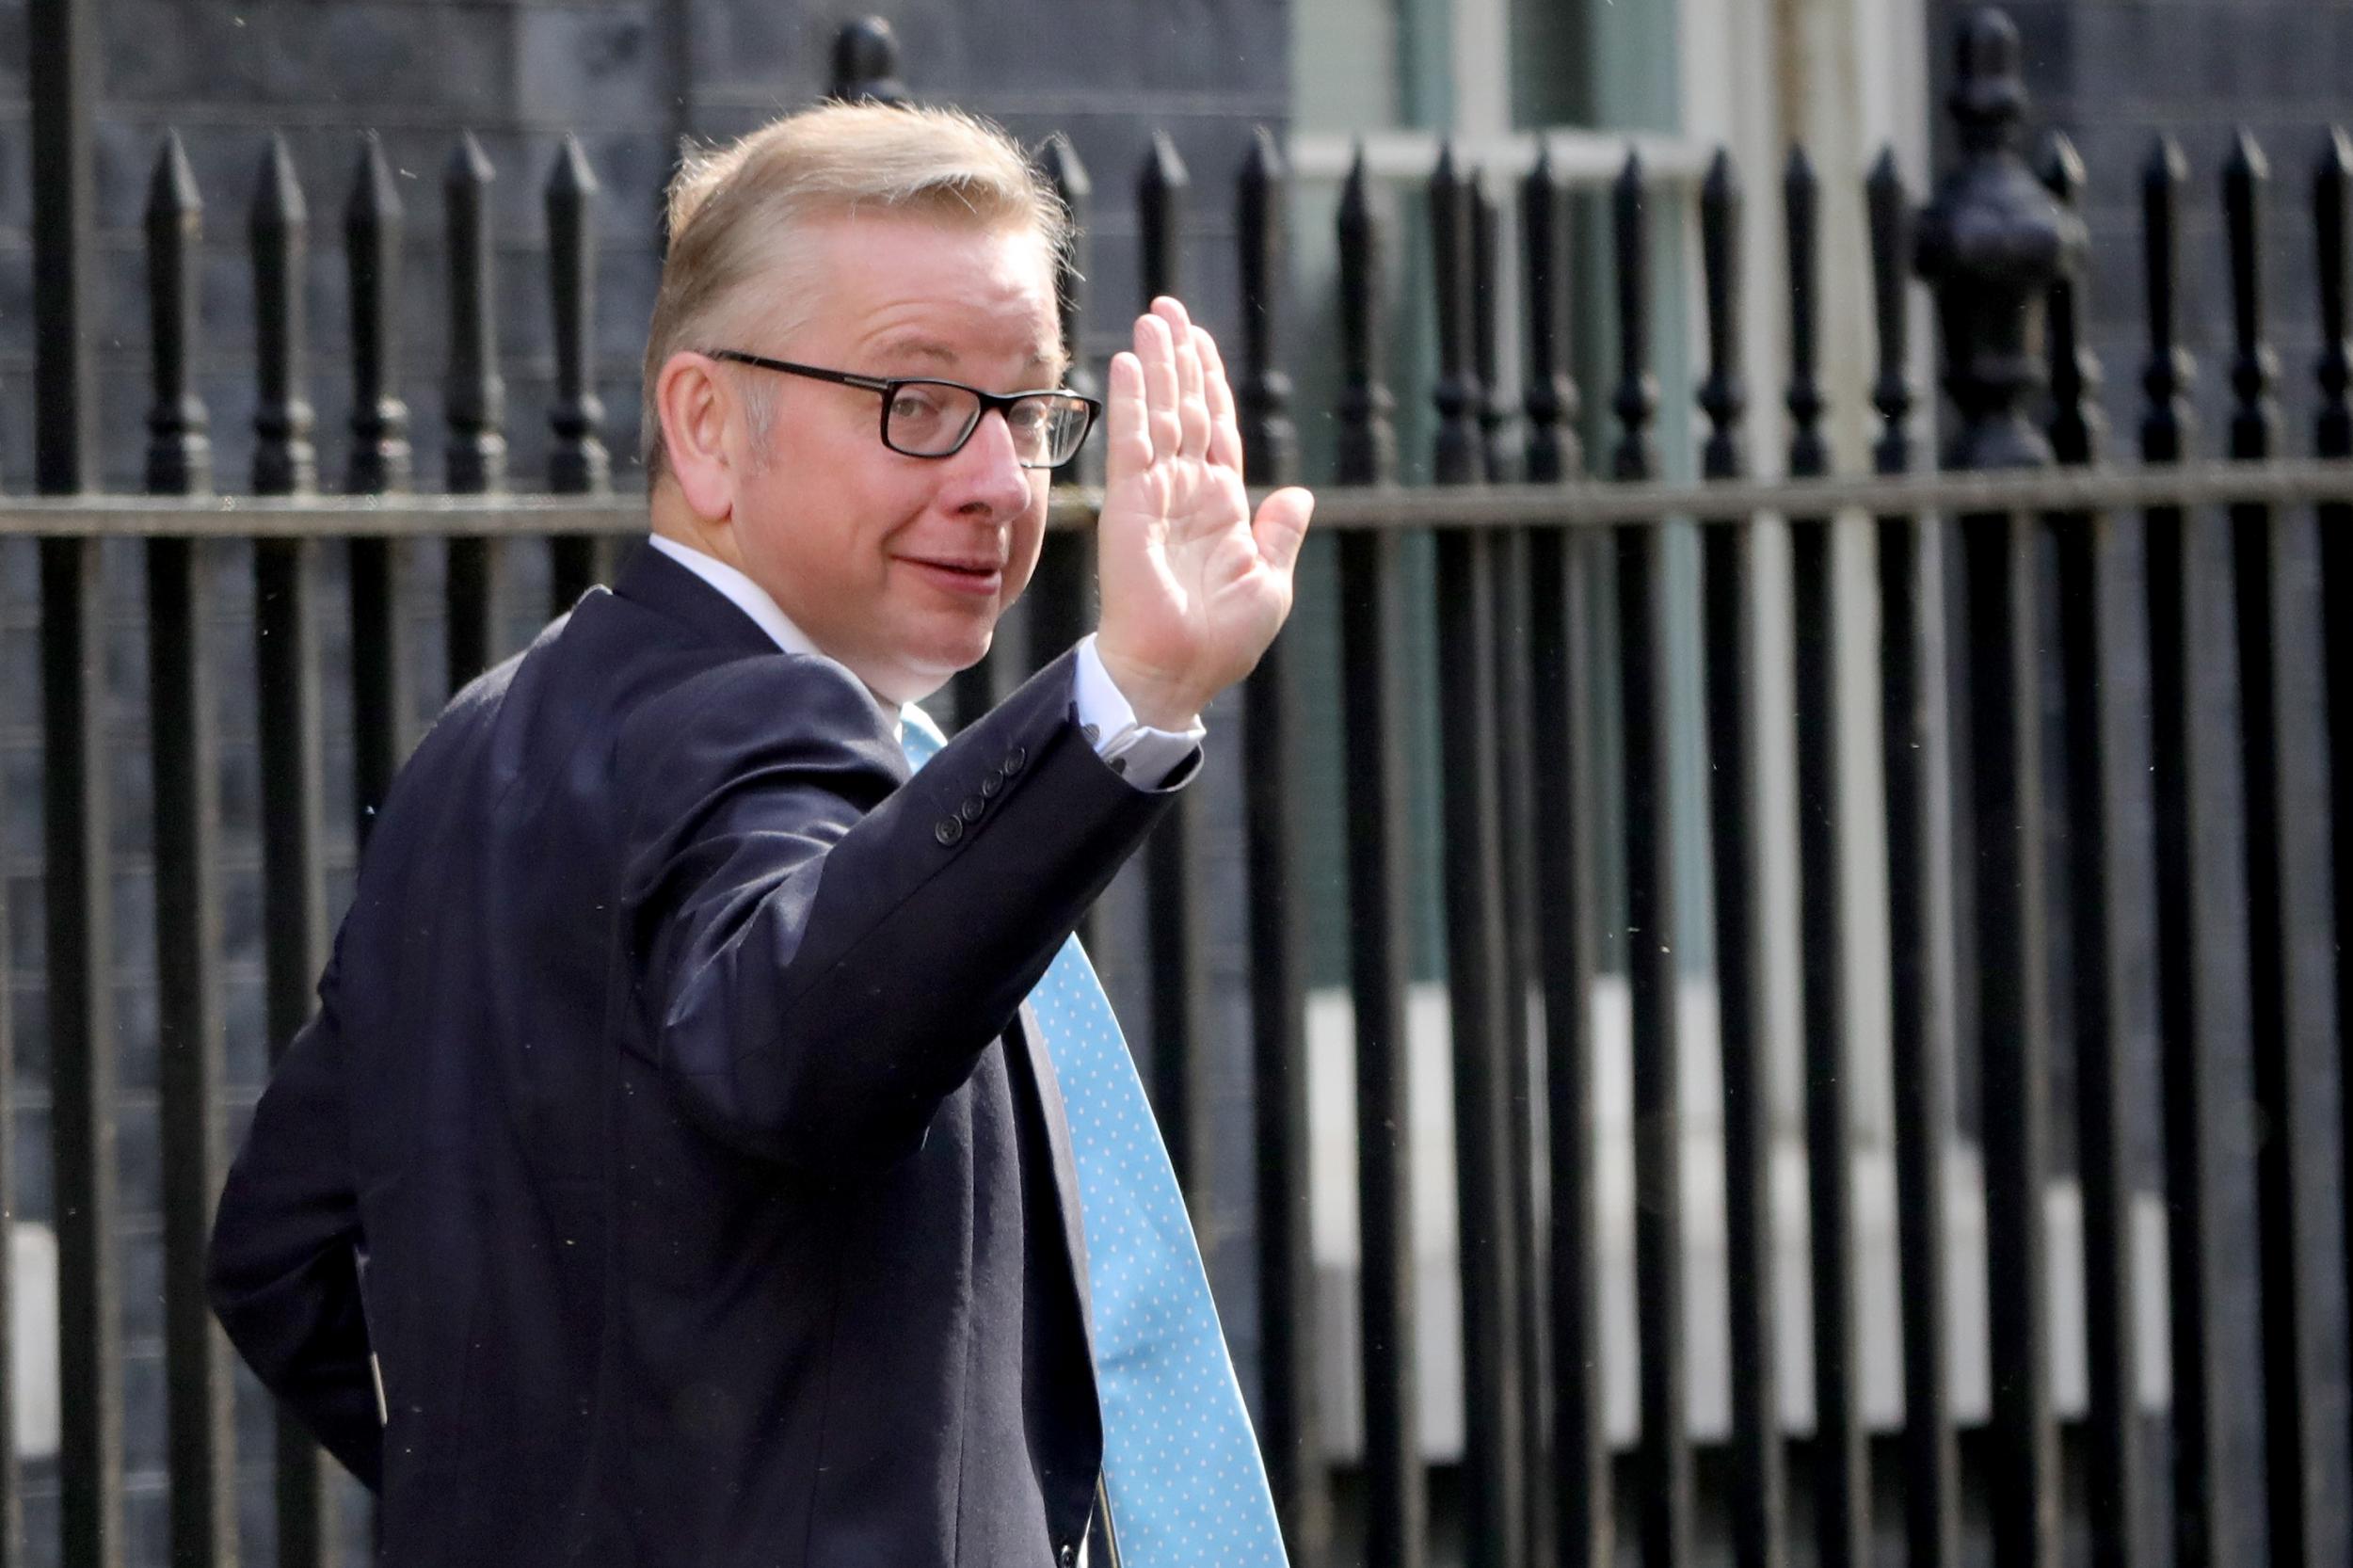 Michael Gove has returned to frontbench politics, to the consternation of Green co-leader Caroline Lucas